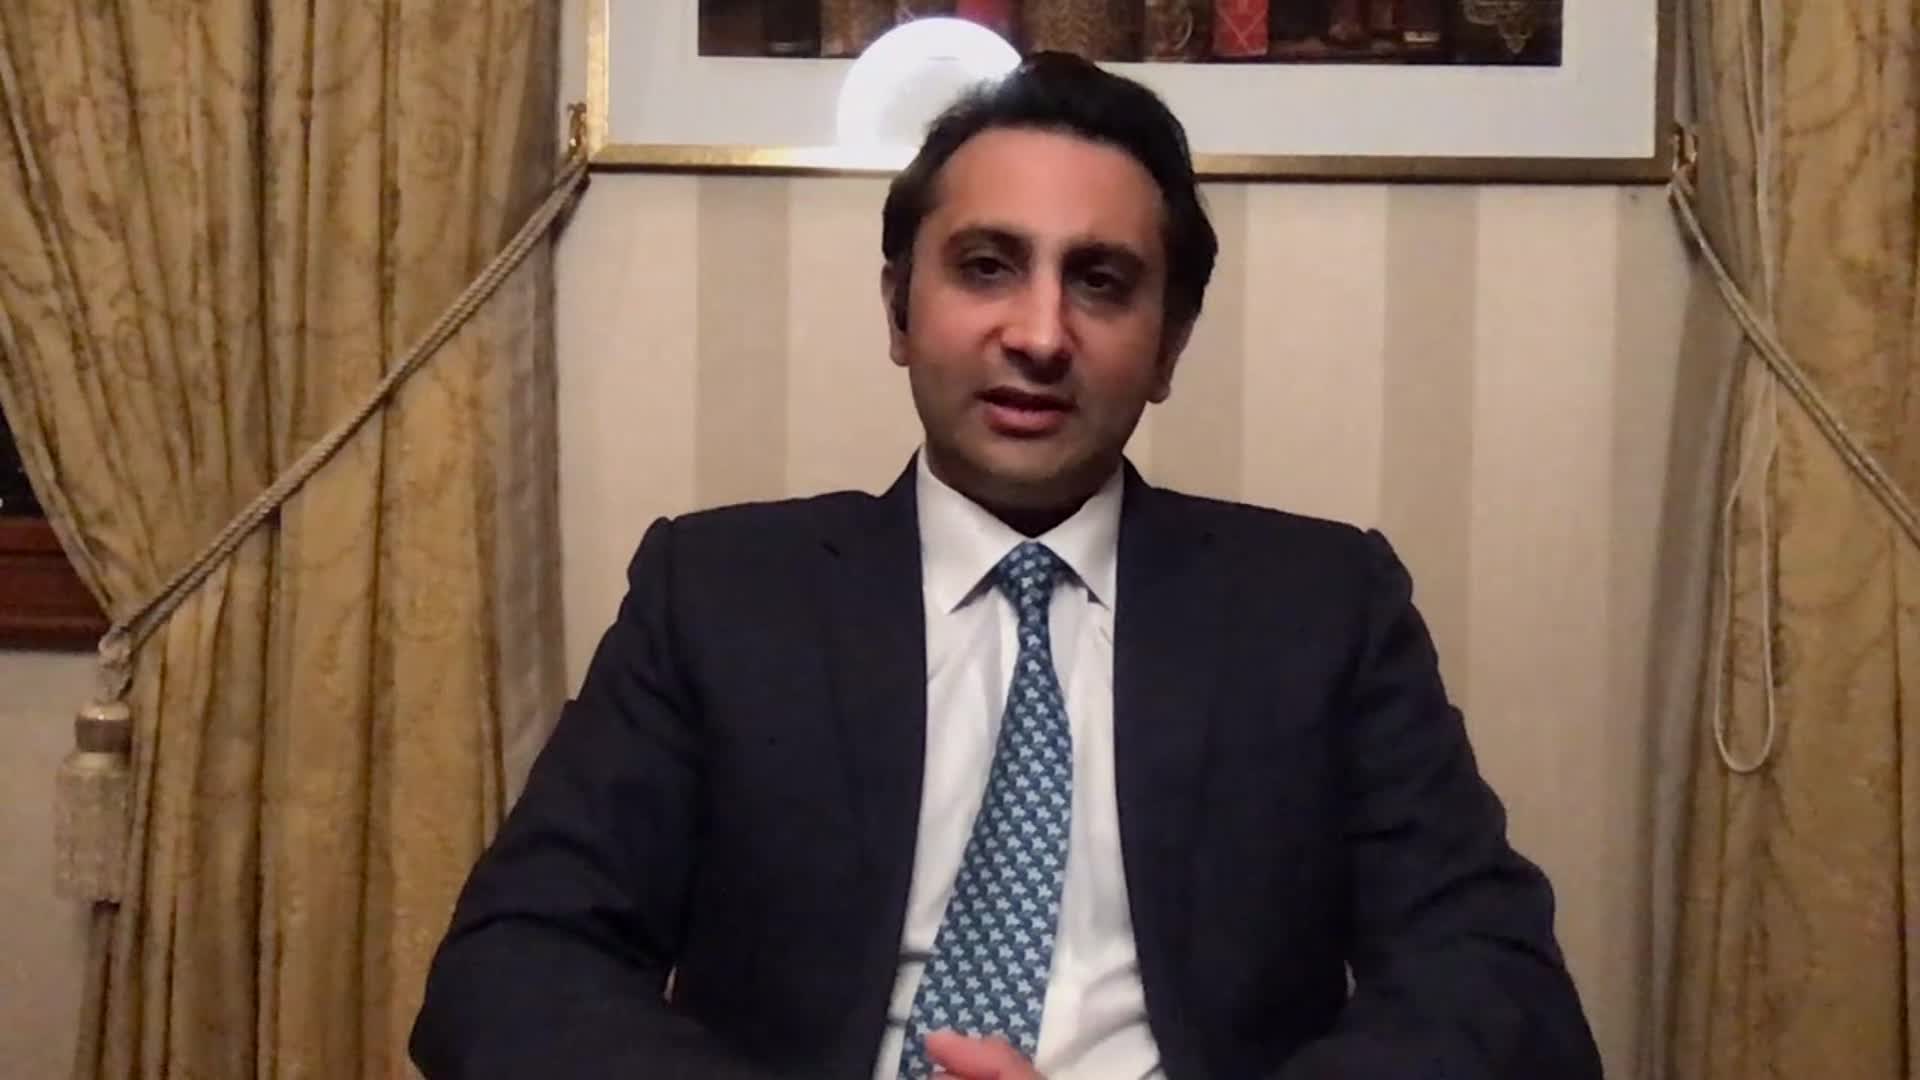 Adar Poonawalla, CEO and executive director of the Serum Institute of India, speaks during an interview on September 22. 